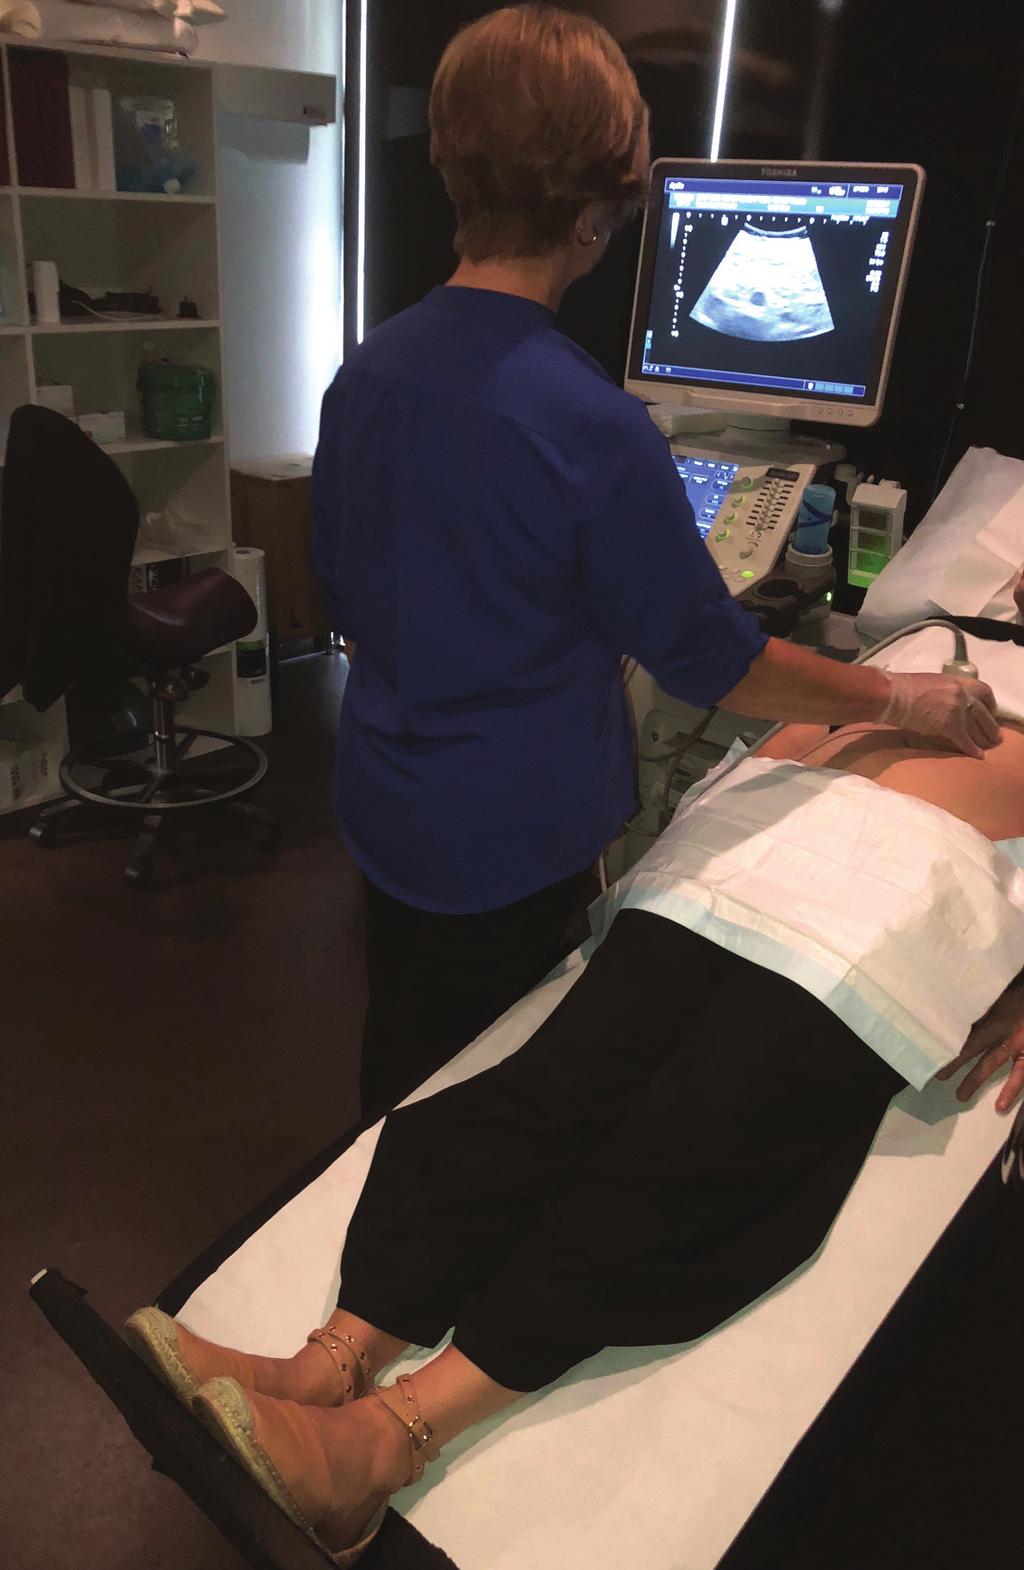 Our Protocol for Transabdominal Pelvic Vein Duplex Ultrasound A summary of s protocol for pelvic vein duplex ultrasonography, including equipment, patient positioning, ultrasound settings, and